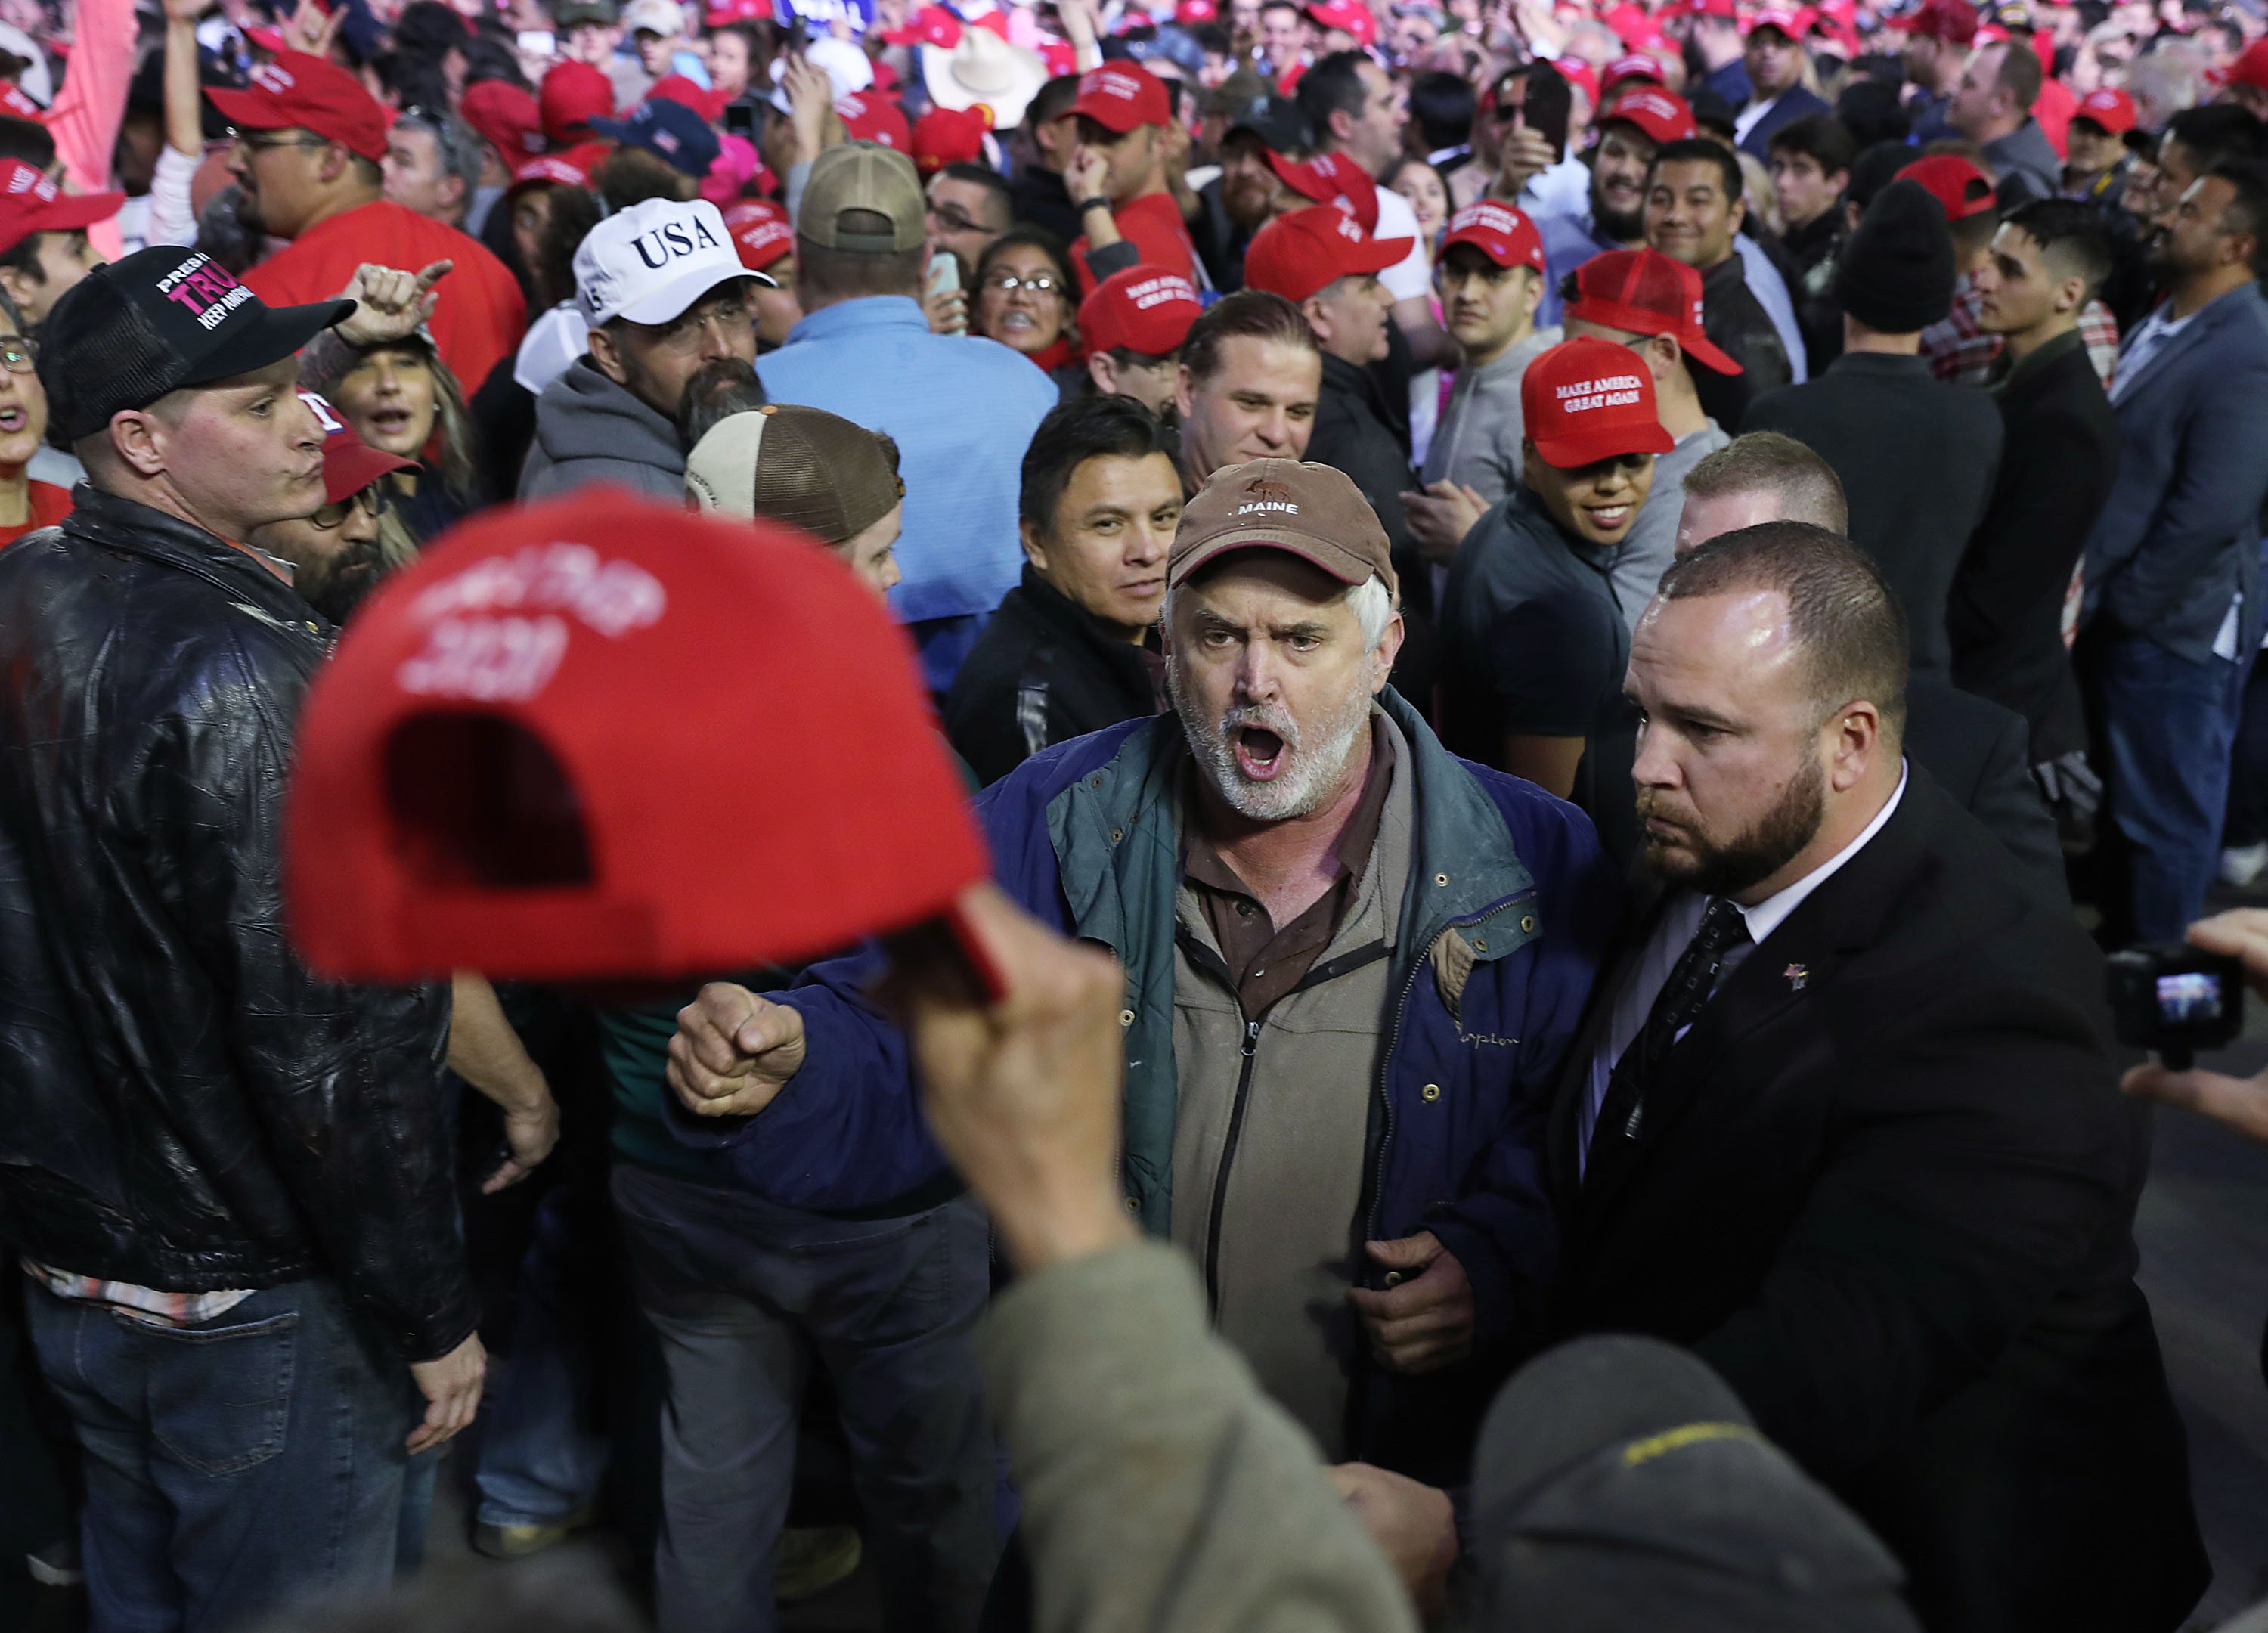 Protester being escorted out by security at Donald Trump's El Paso Rally | Photo: Getty Images